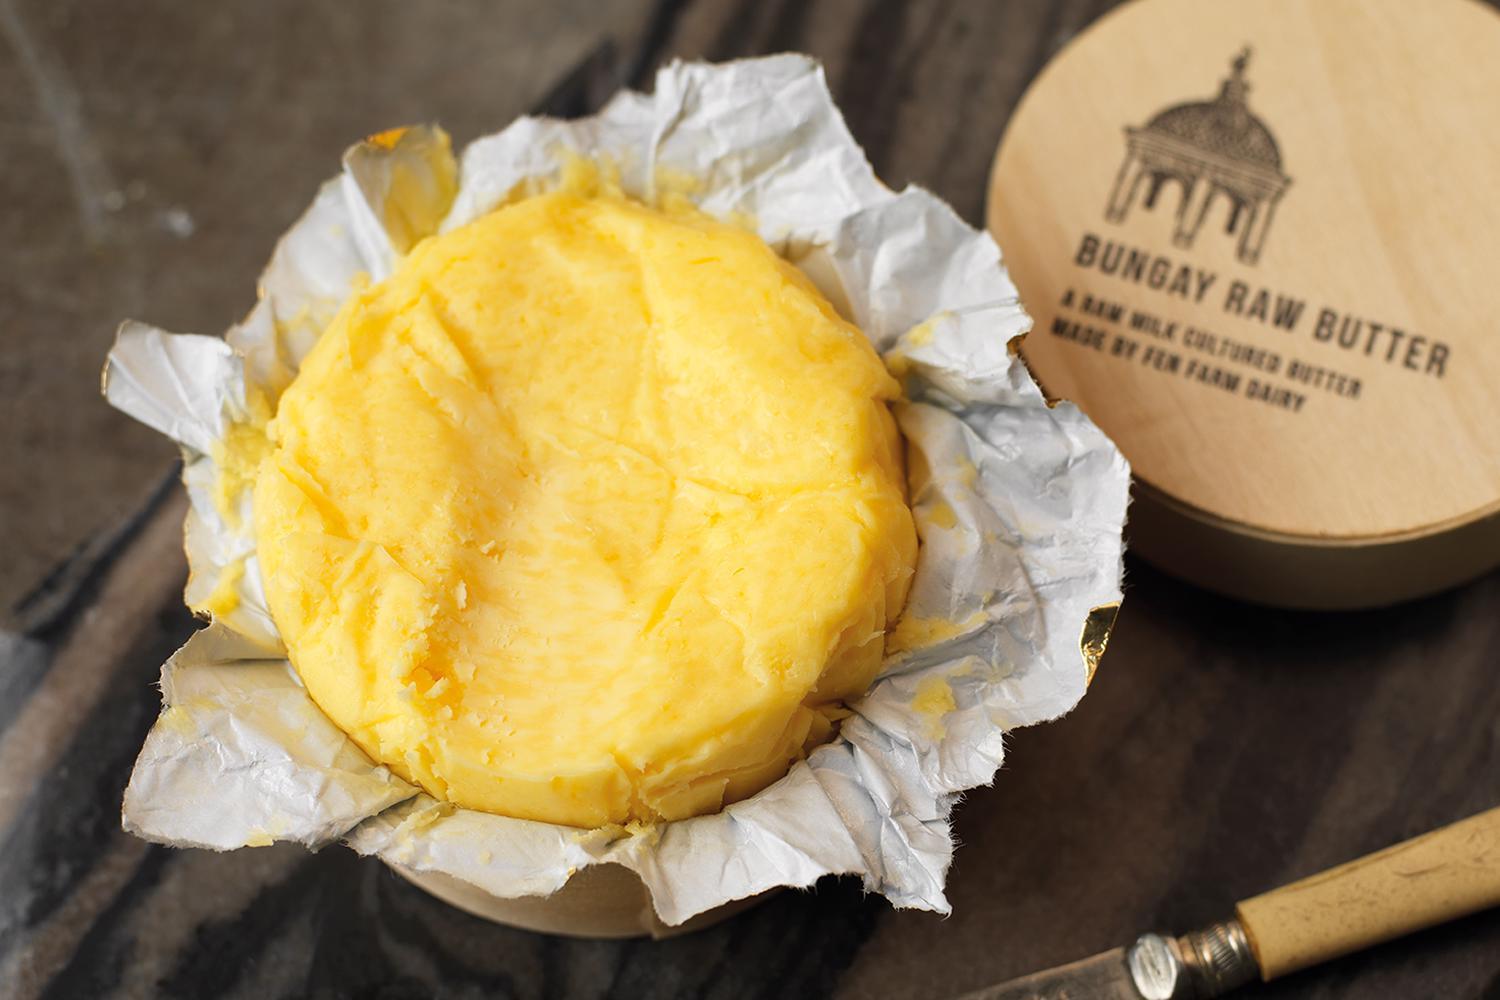 Bungay Cultured Raw Butter - DukesHill